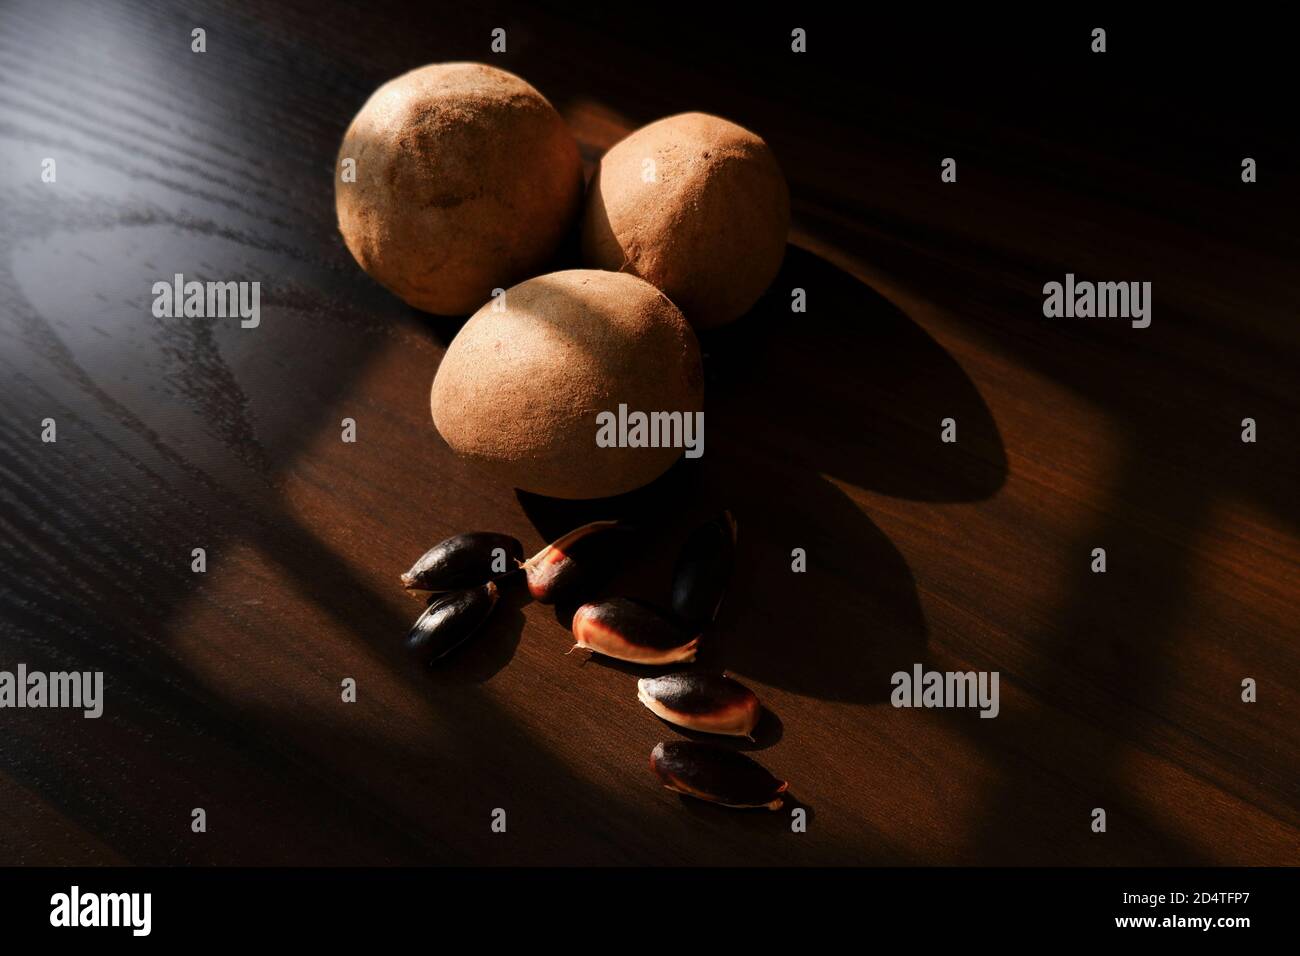 a close shot of sapota (Chikoo) fruits & seeds isolated on wooden background Stock Photo